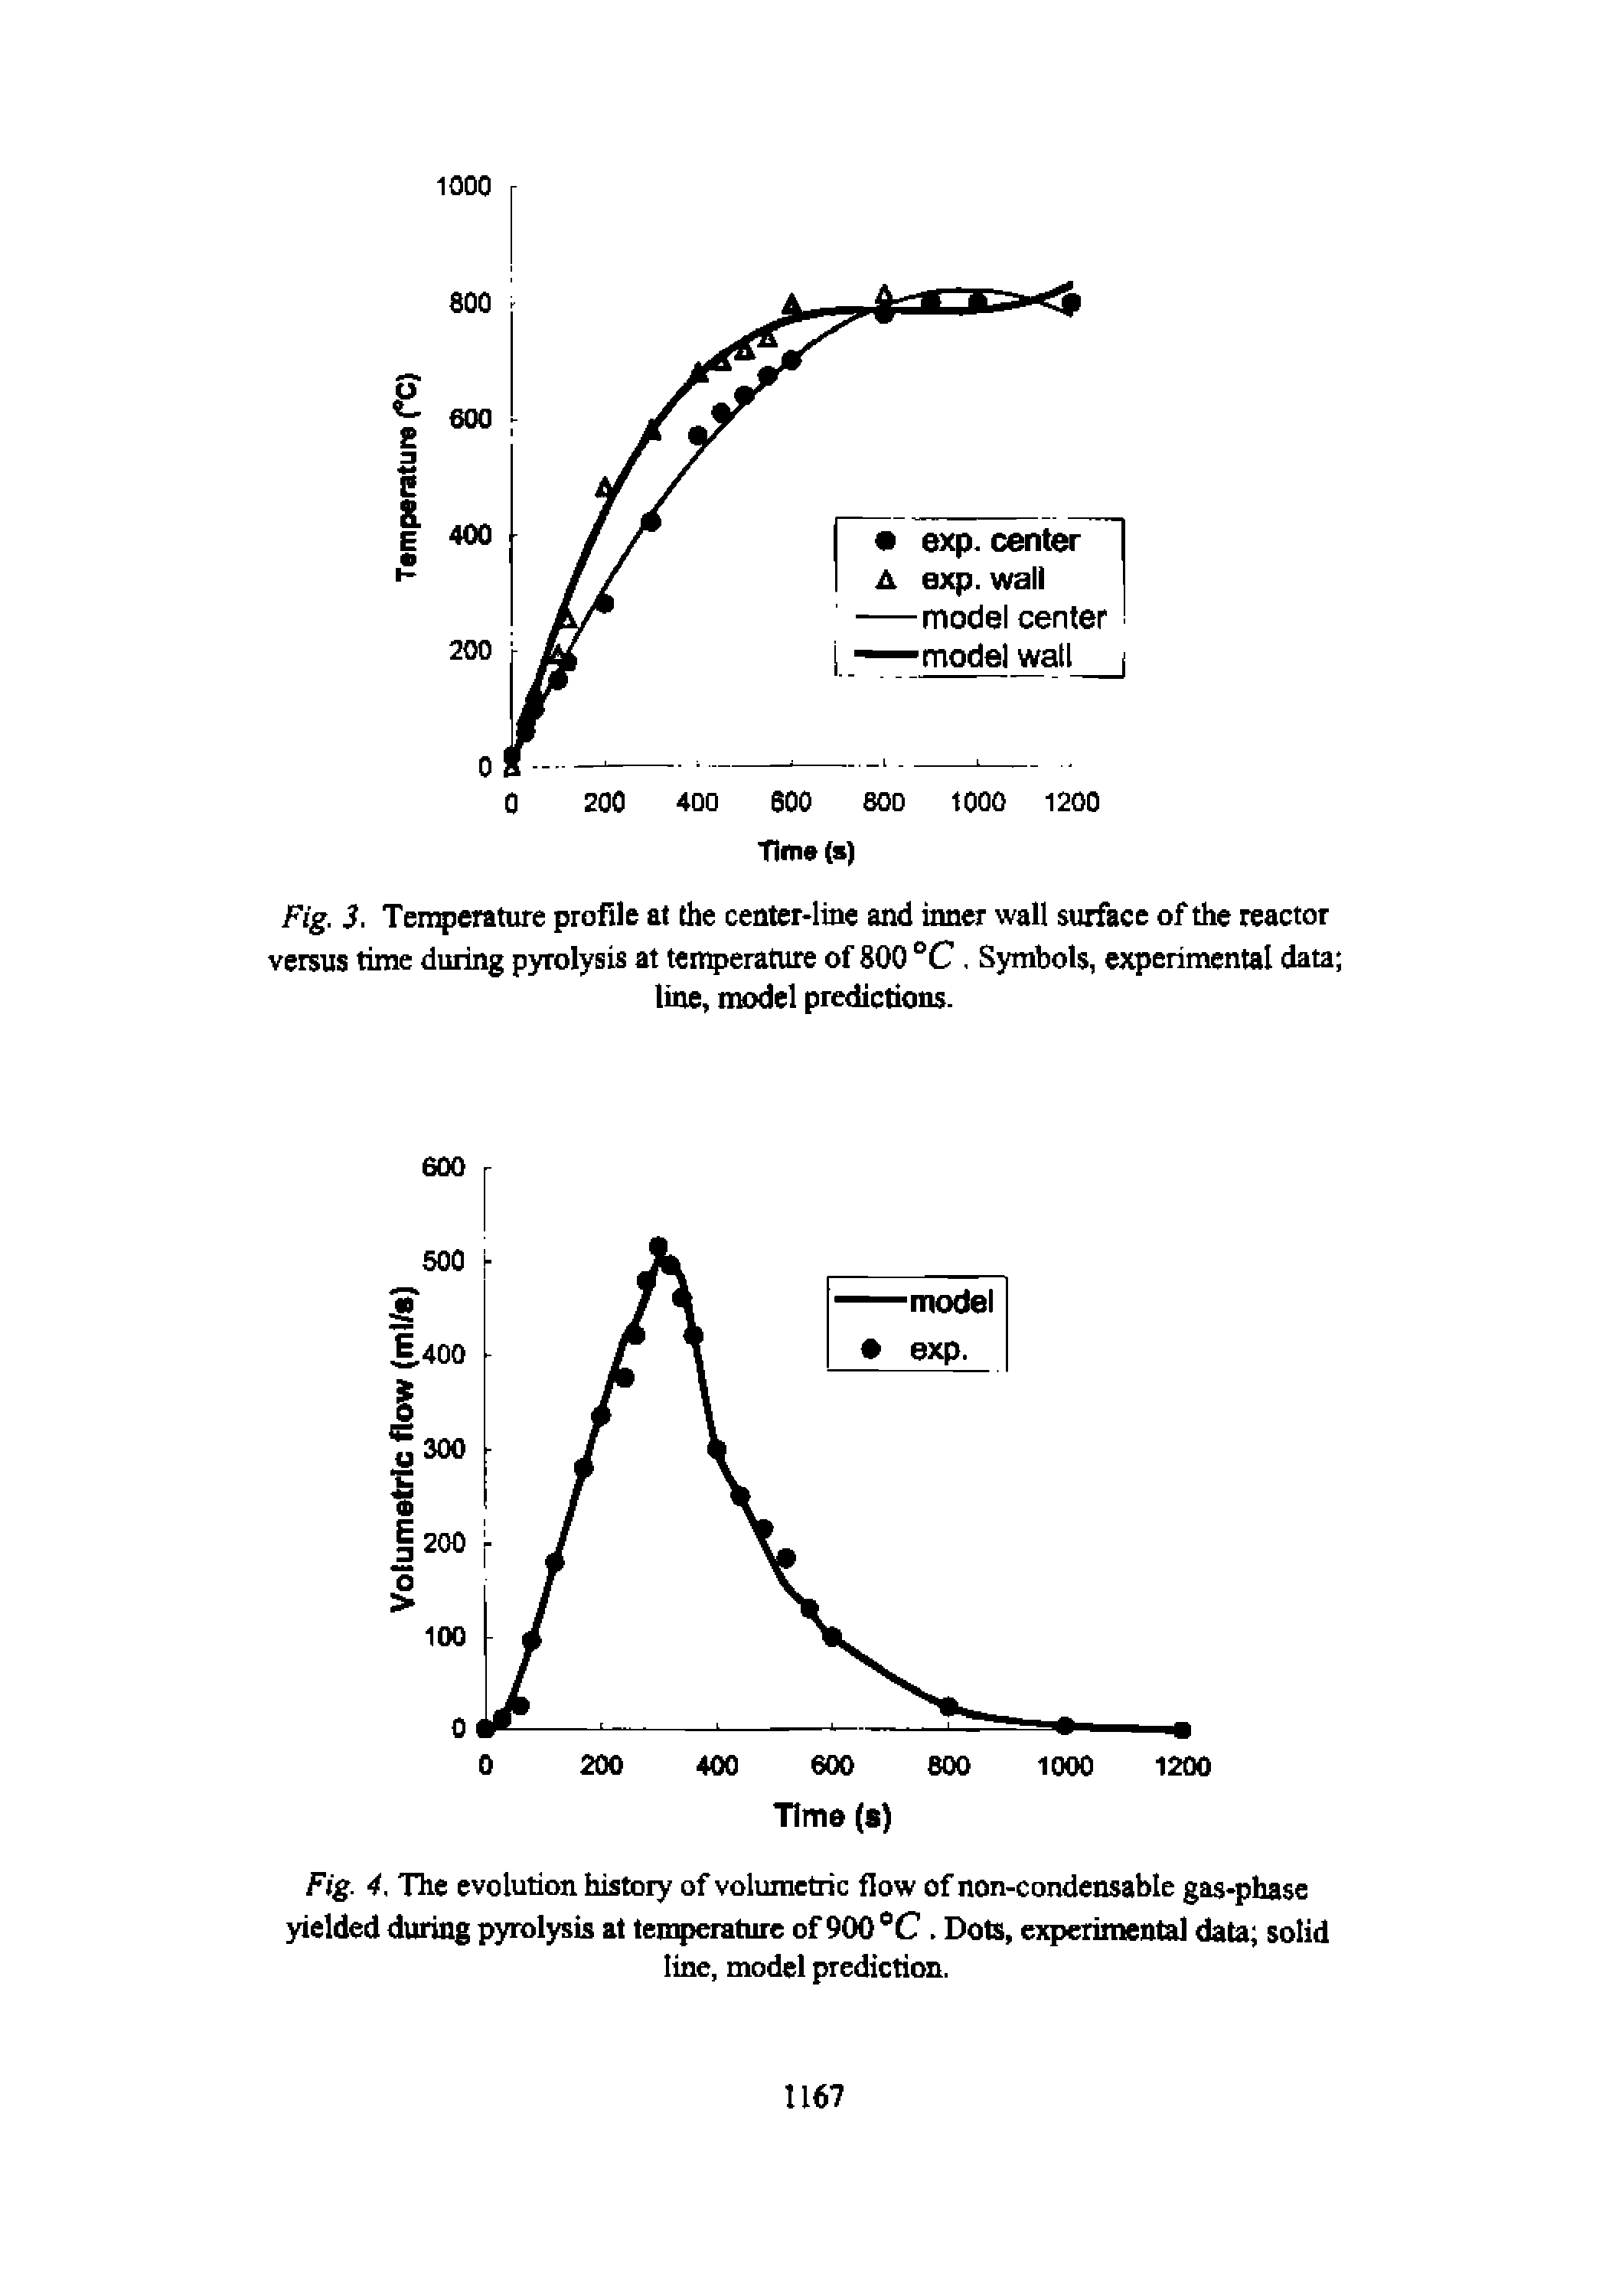 Fig. 3. Temperature profile at the center-line and inner wall surface of the reactor versus time during pyrolysis at teit erature of 800 °C, Symbols, experimental data ...